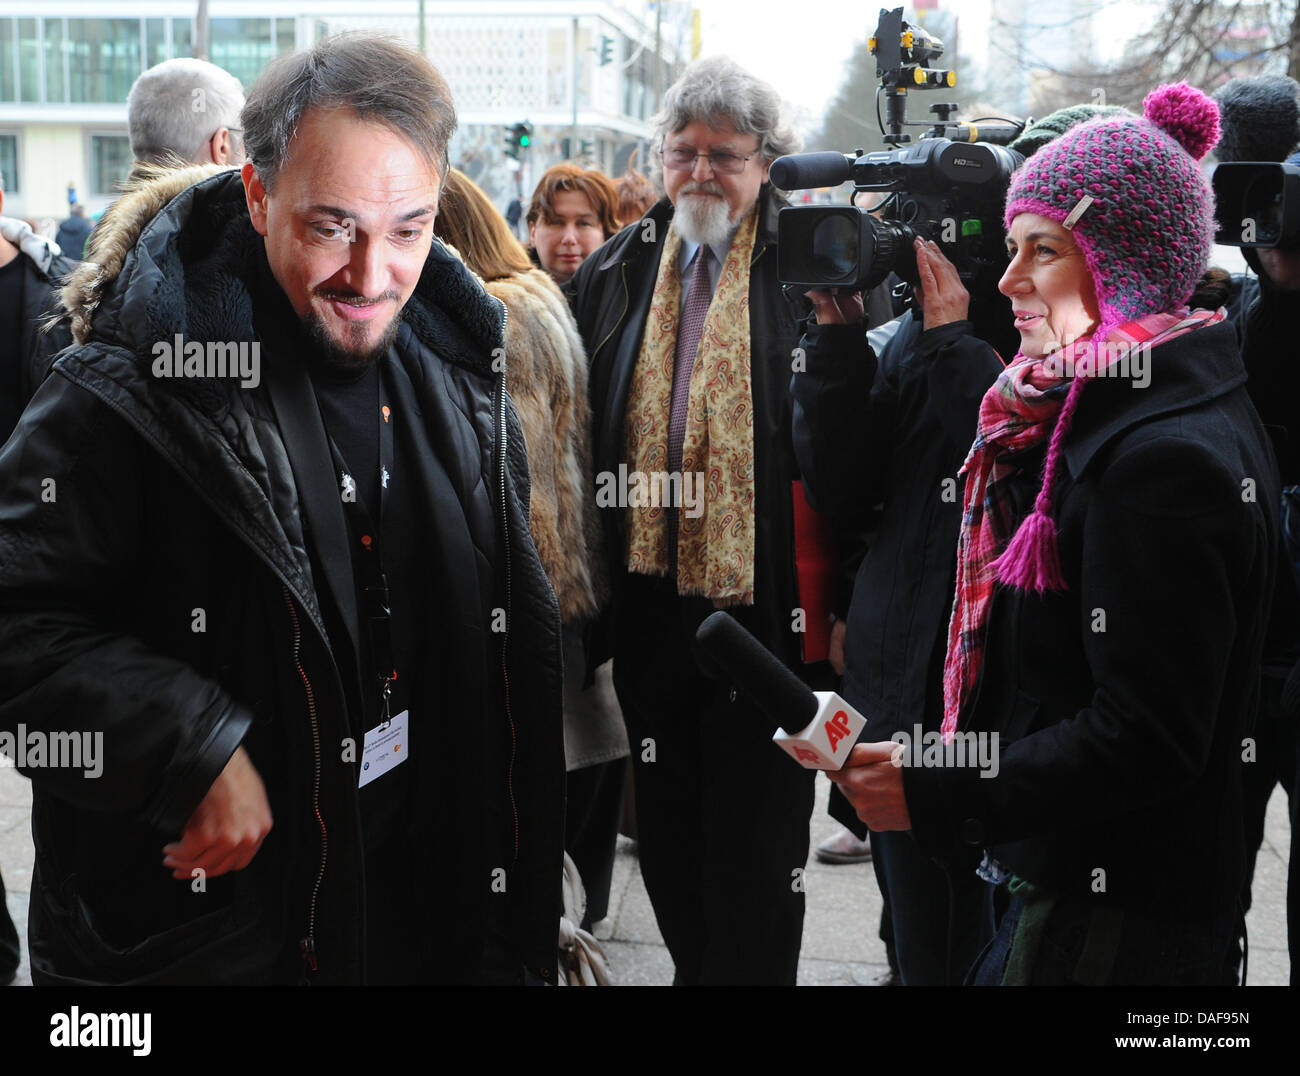 Russian director Cyril Tuschi arrives for the premiere of his film 'Khodorkovsky' during the 61st Berlin International Film Festival, in Berlin, Germany, 14 February 2011. The film is shown in the section Panorama Dokumente during the Berlin International Film Festival. The 61st Berlinale takes place from 10 to 20 February 2011. Photo: Jens Kalaene Stock Photo